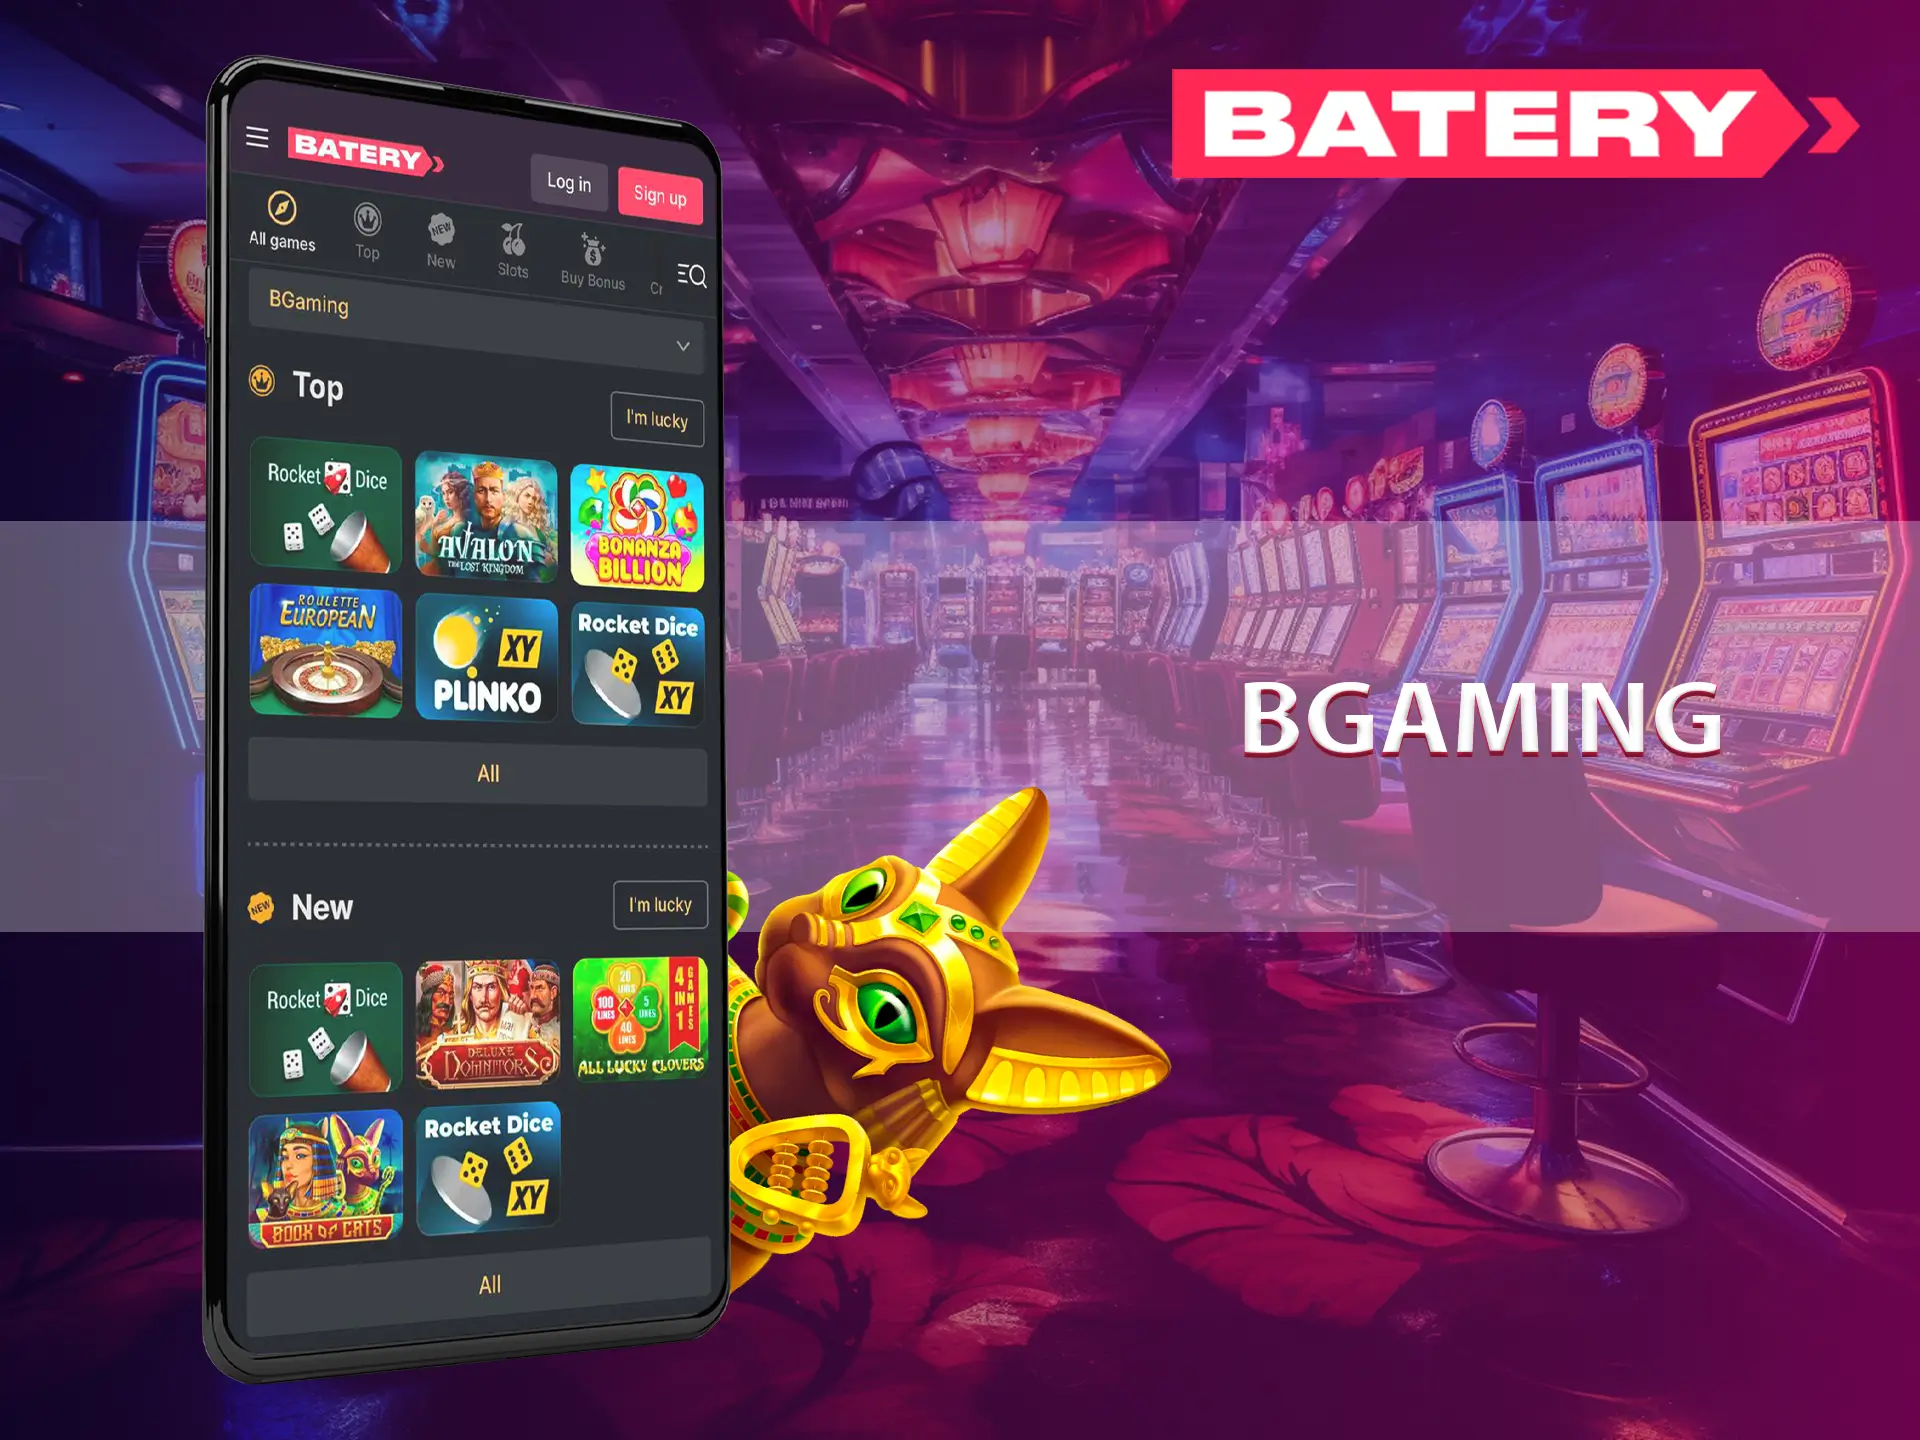 A lot of excitement and emotions you will find in the games of the provider Bgaming.